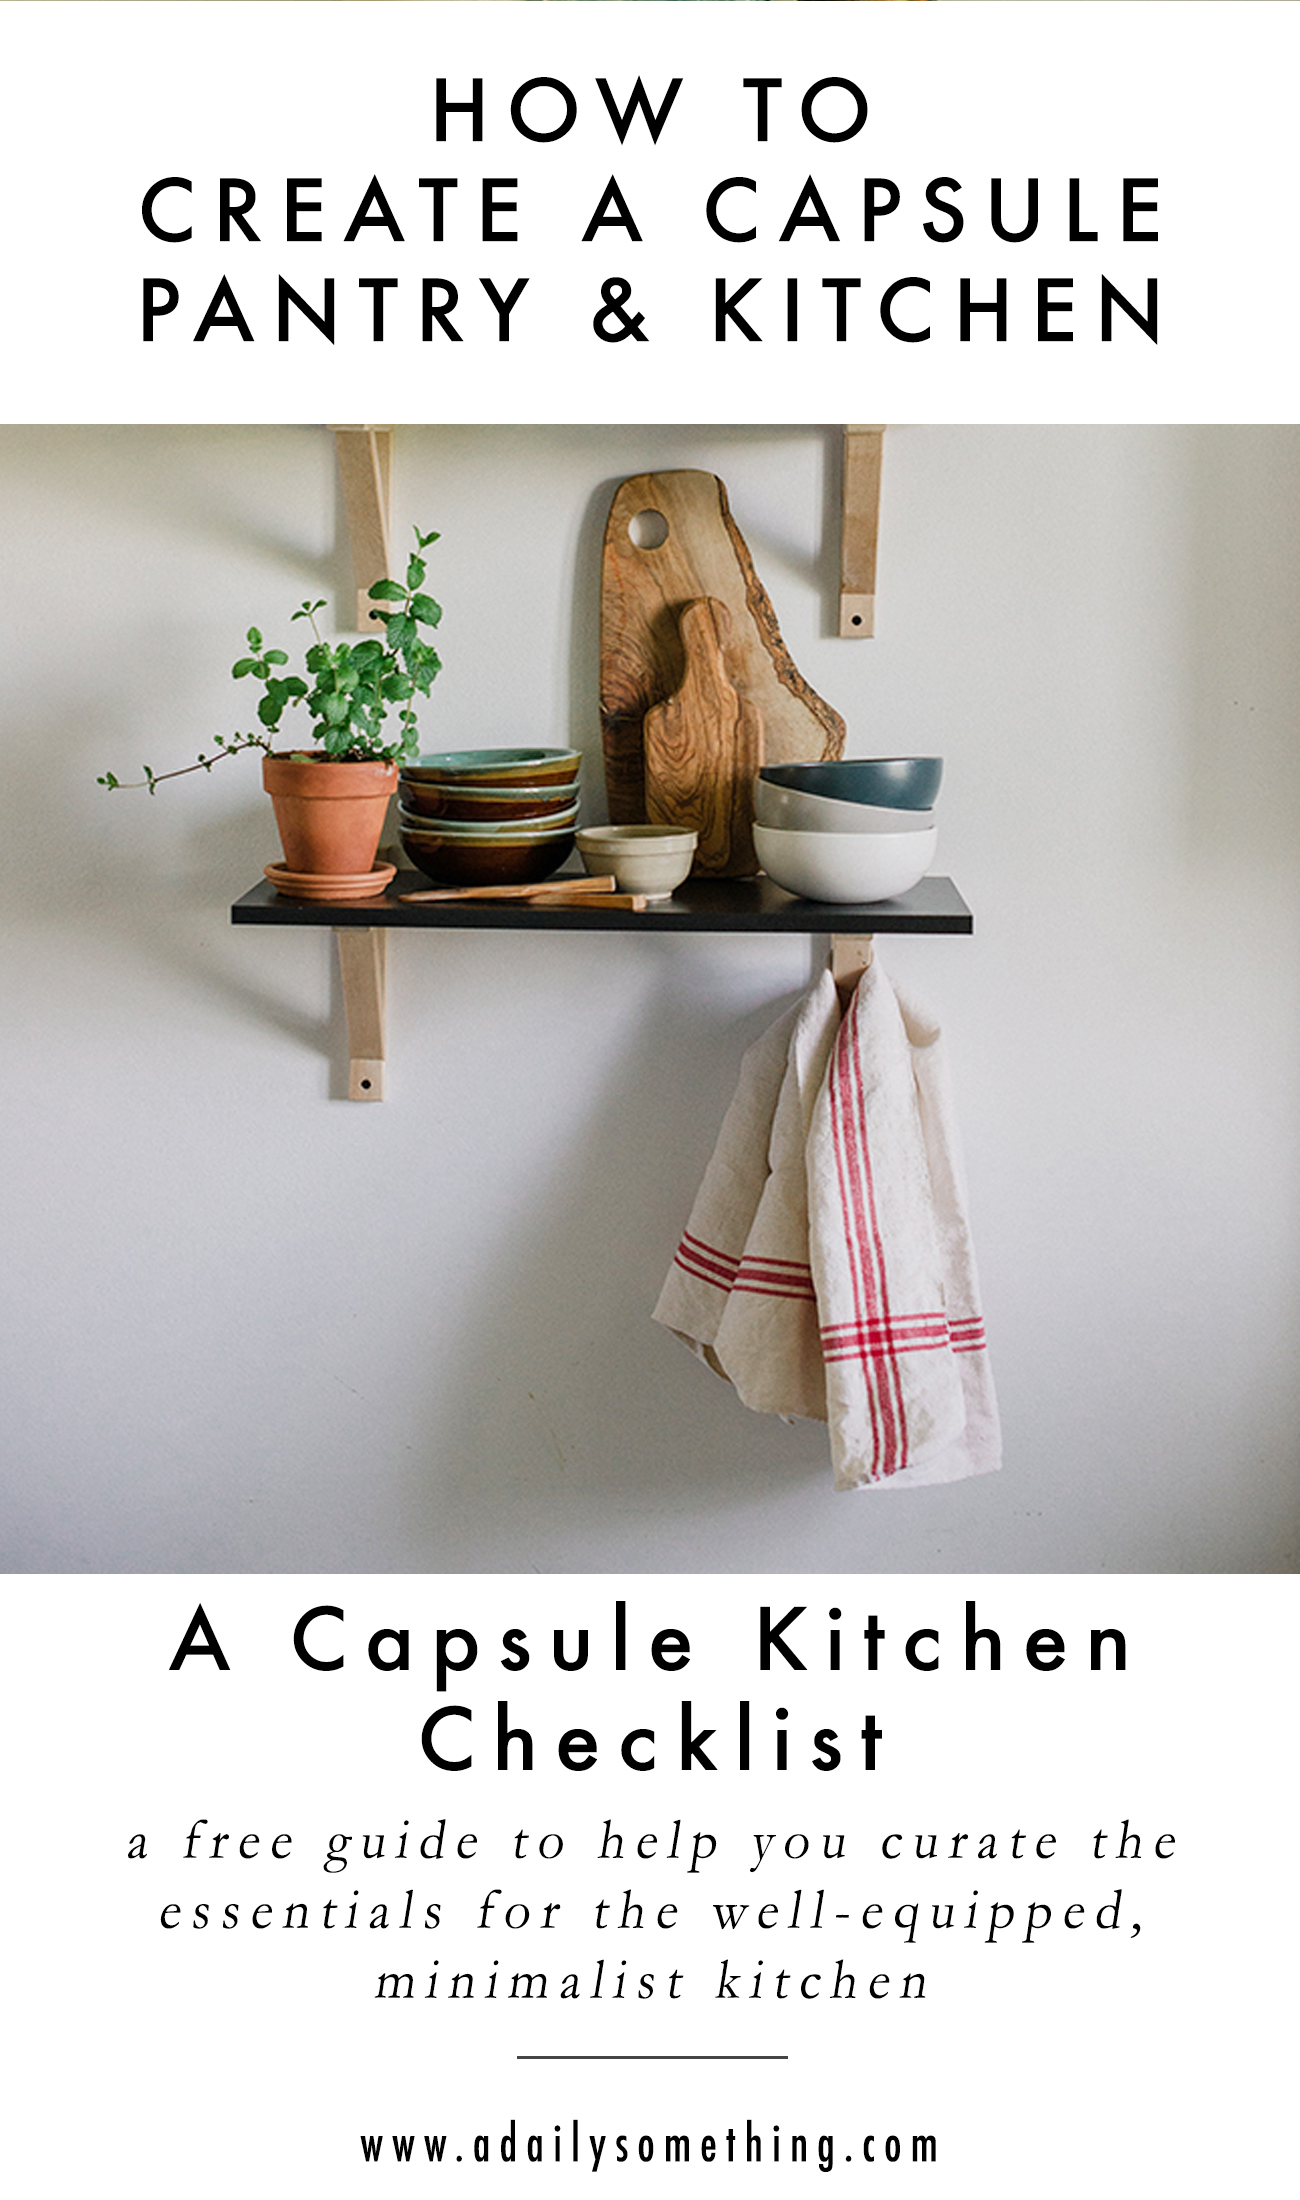 https://www.adailysomething.com/wp-content/uploads/2018/03/A-Capsule-Kitchen-PIN5.jpg